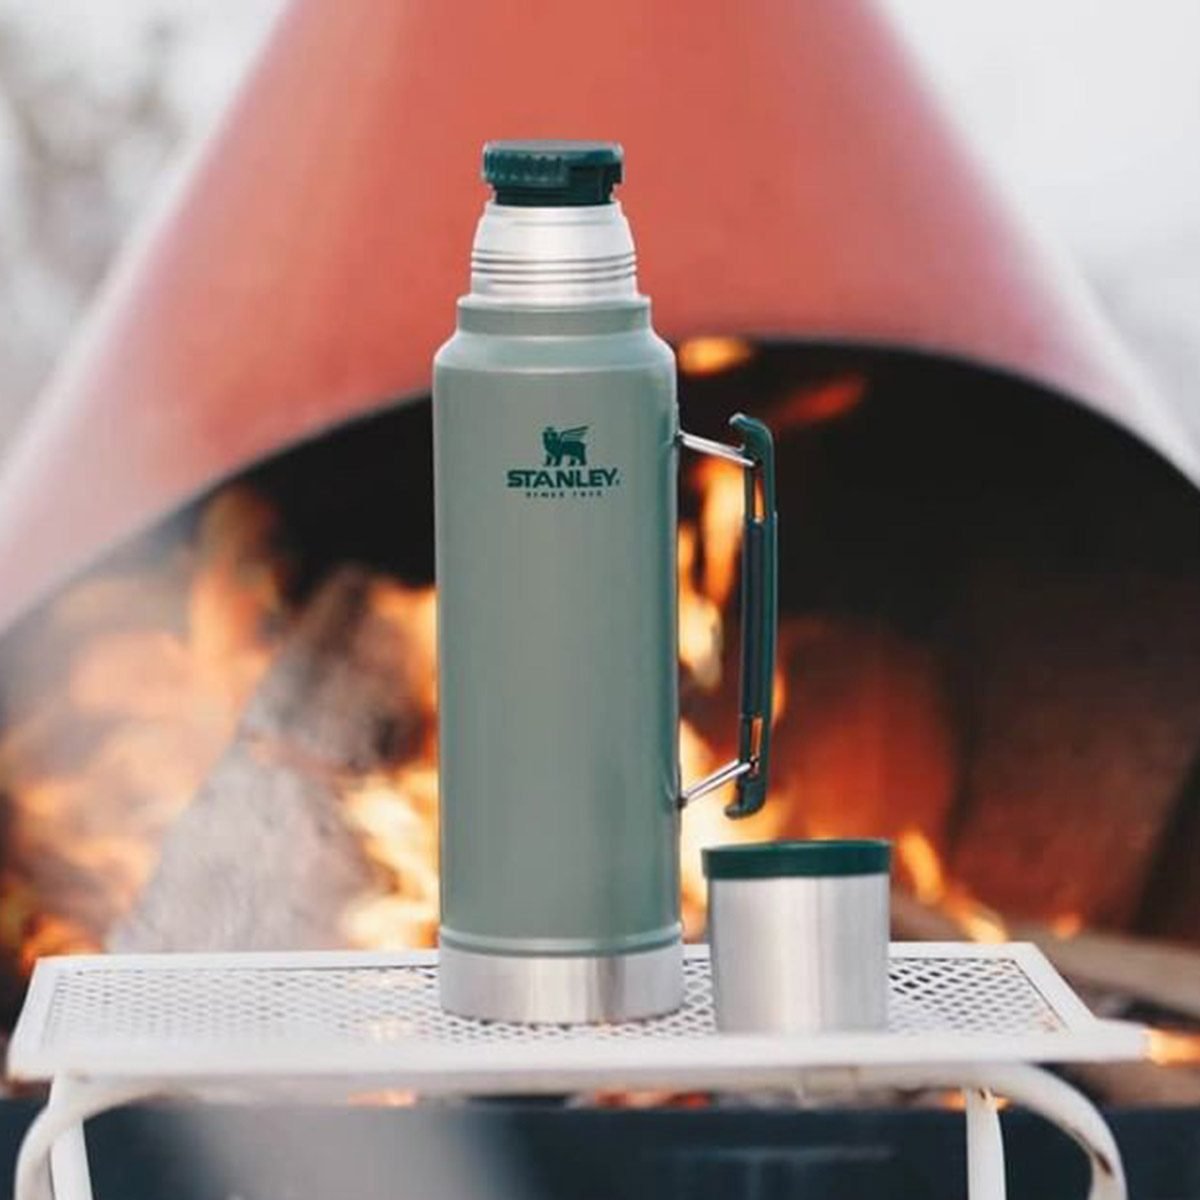 https://www.tasteofhome.com/wp-content/uploads/2020/05/stanley-thermos-feature.jpg